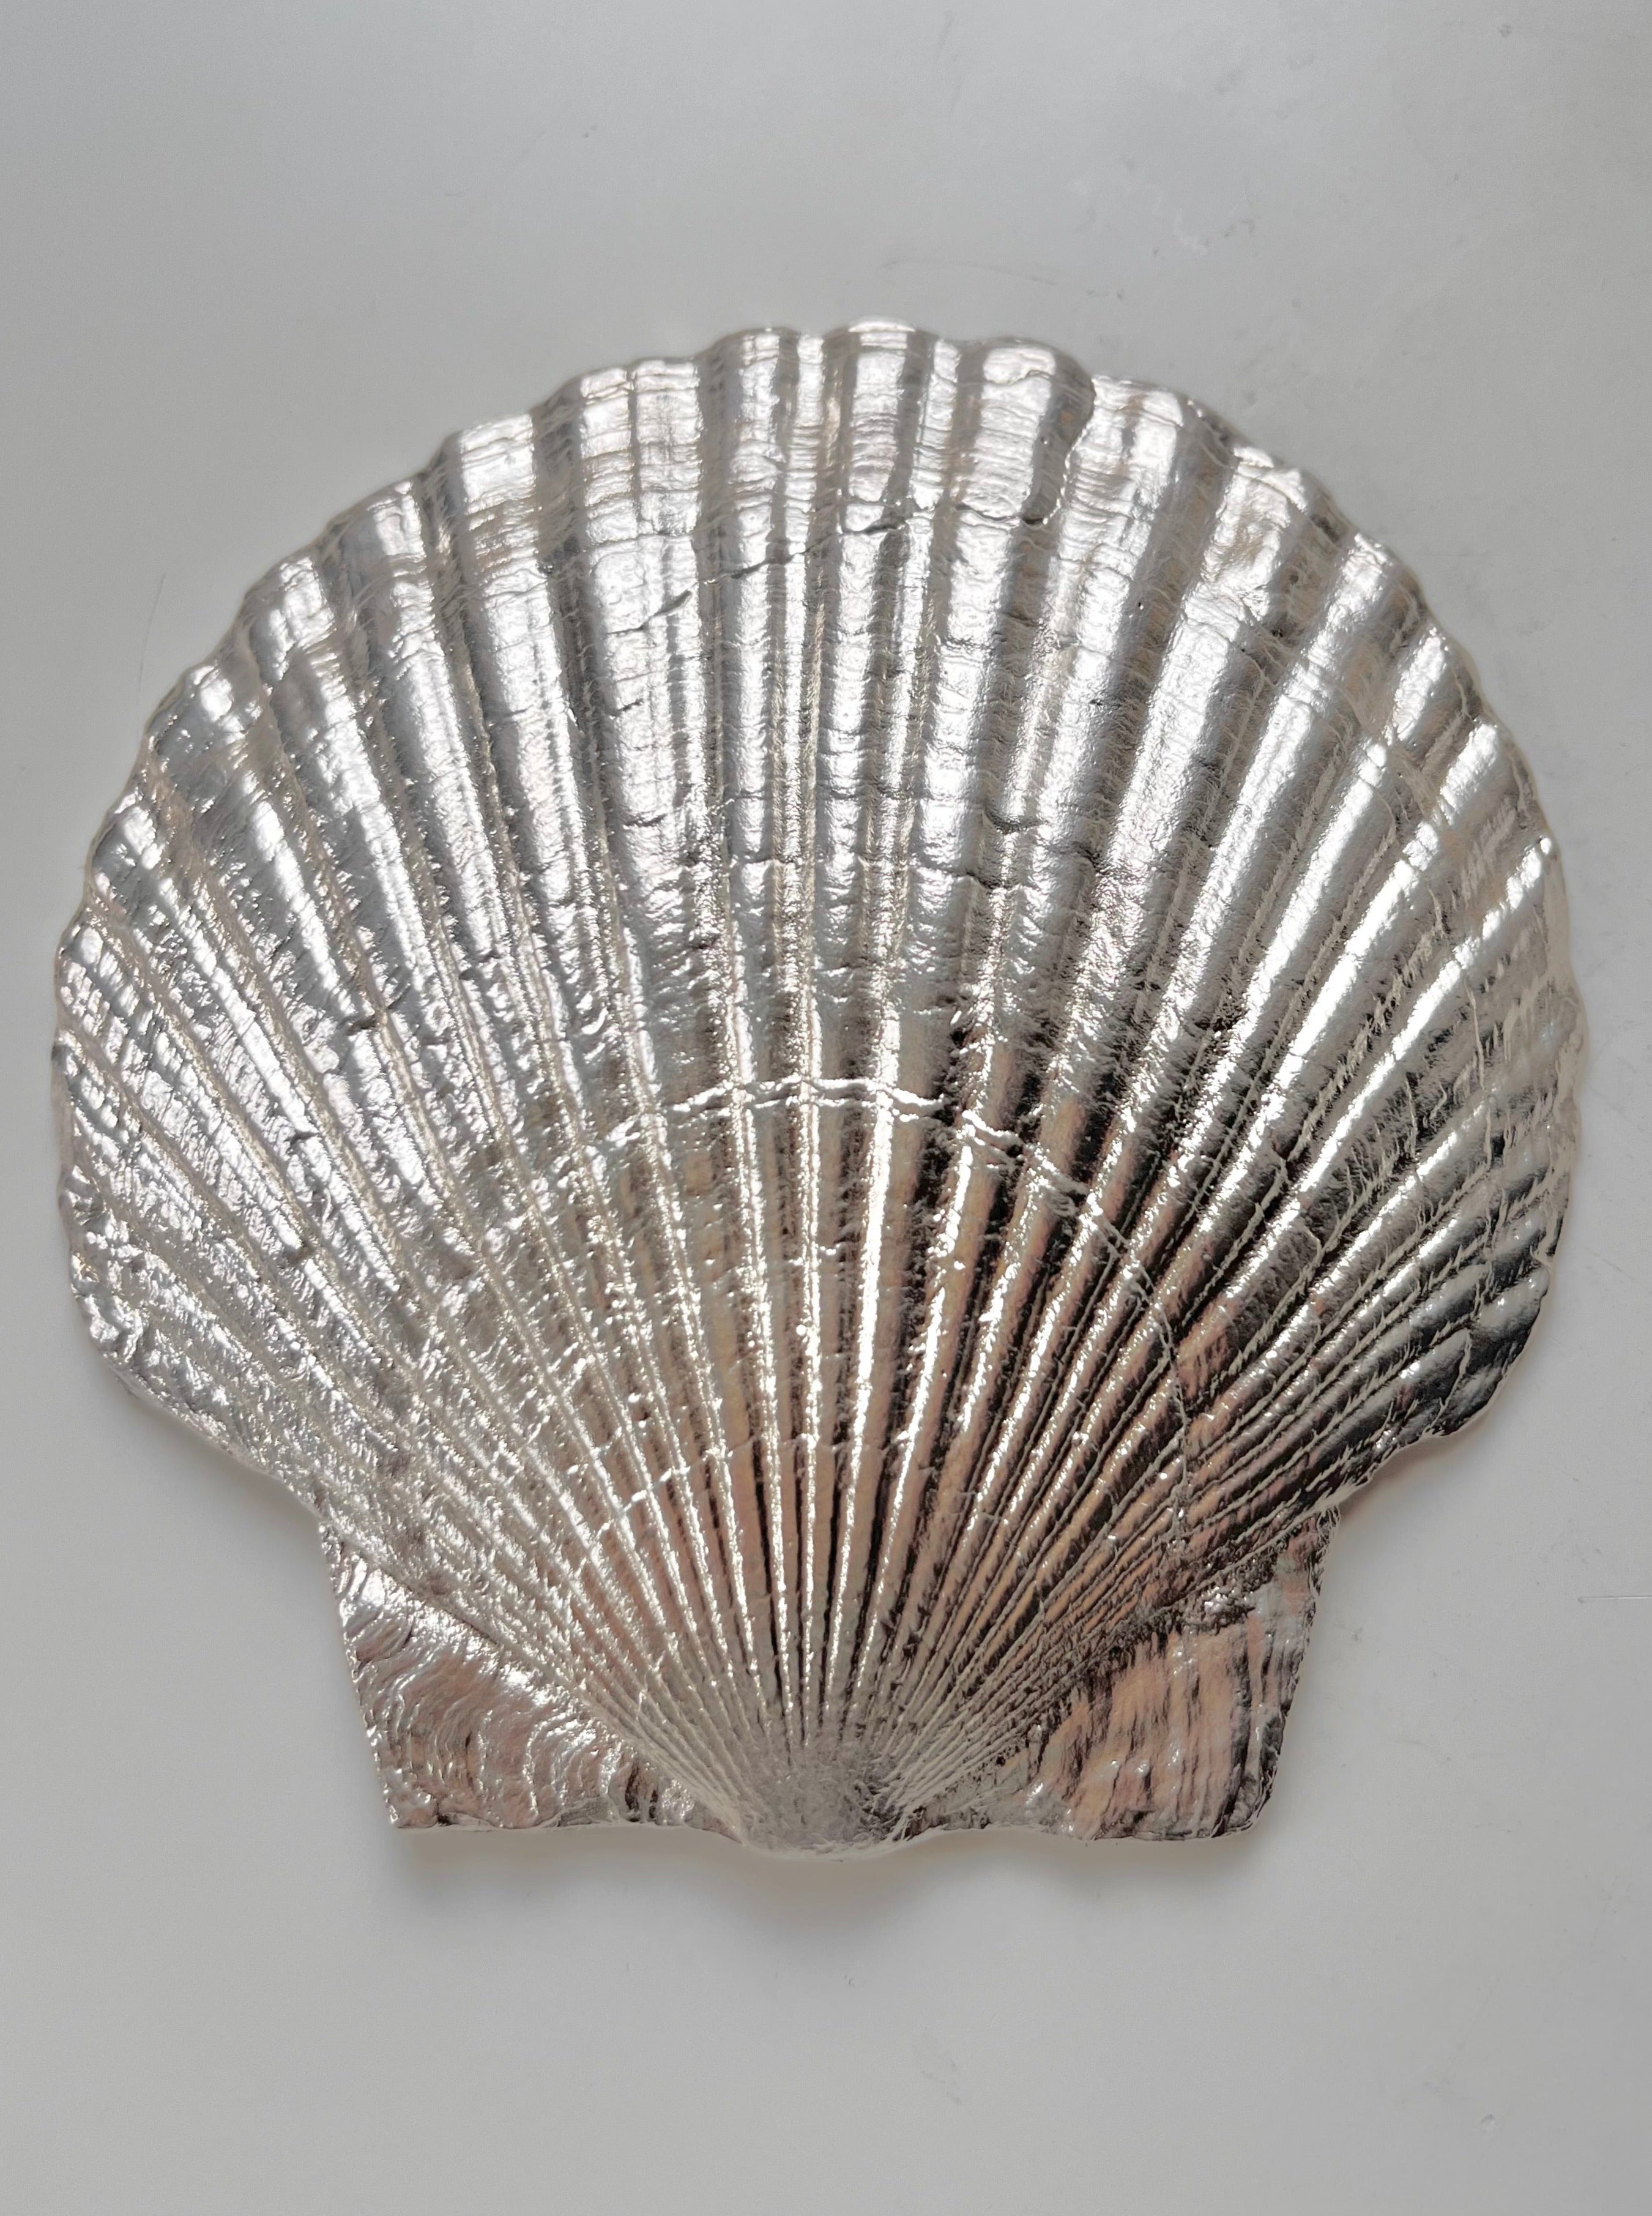 Hand Sculpted Silver Plated Clam Shell Plate